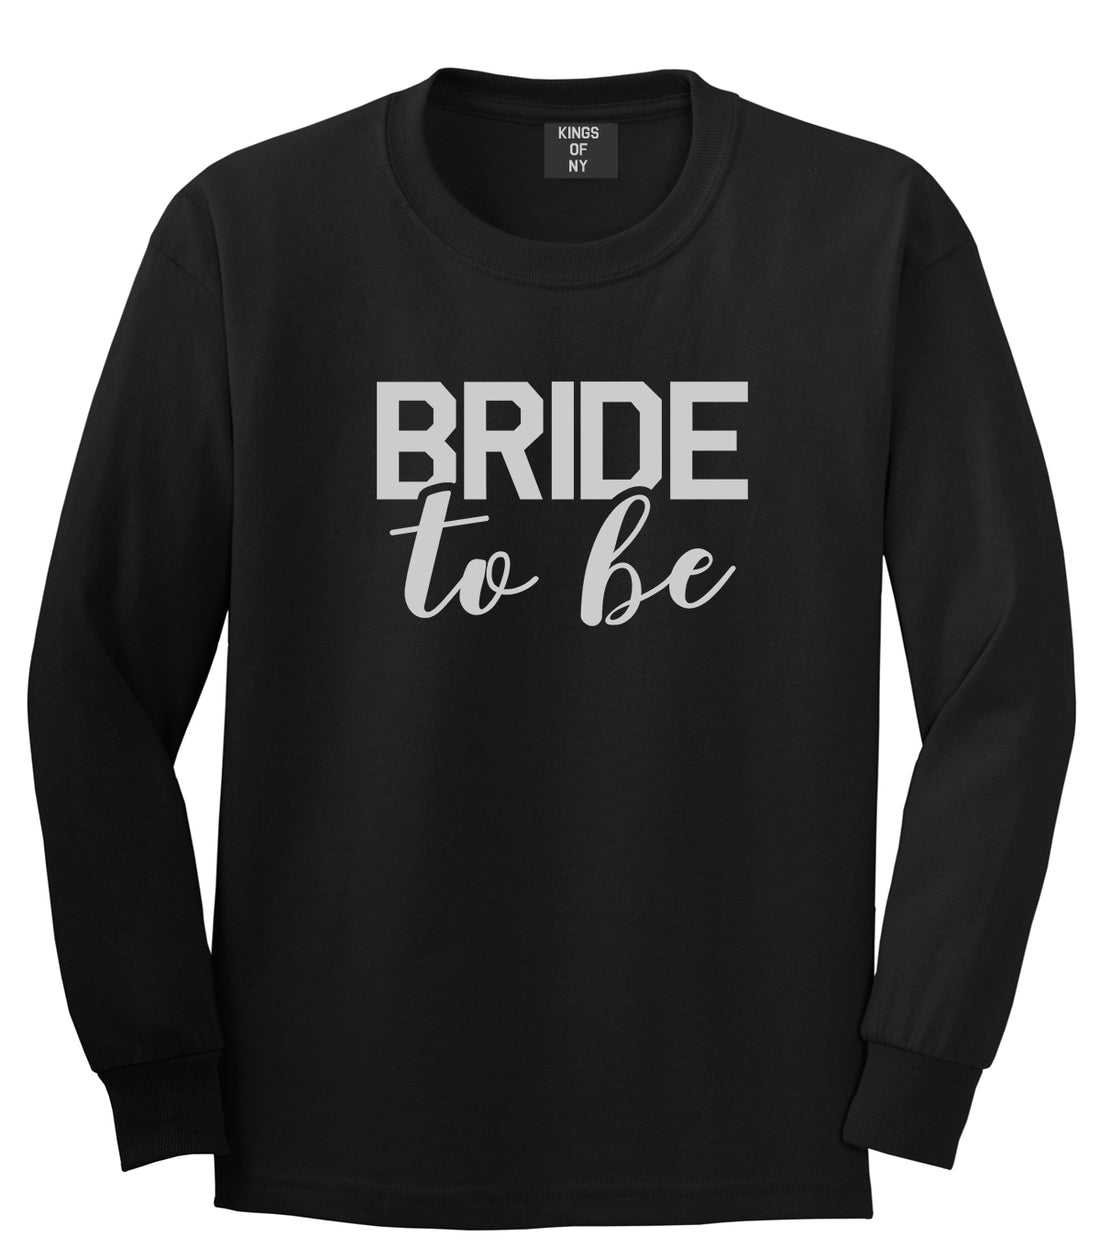 Bride To Be Black Long Sleeve T-Shirt by Kings Of NY